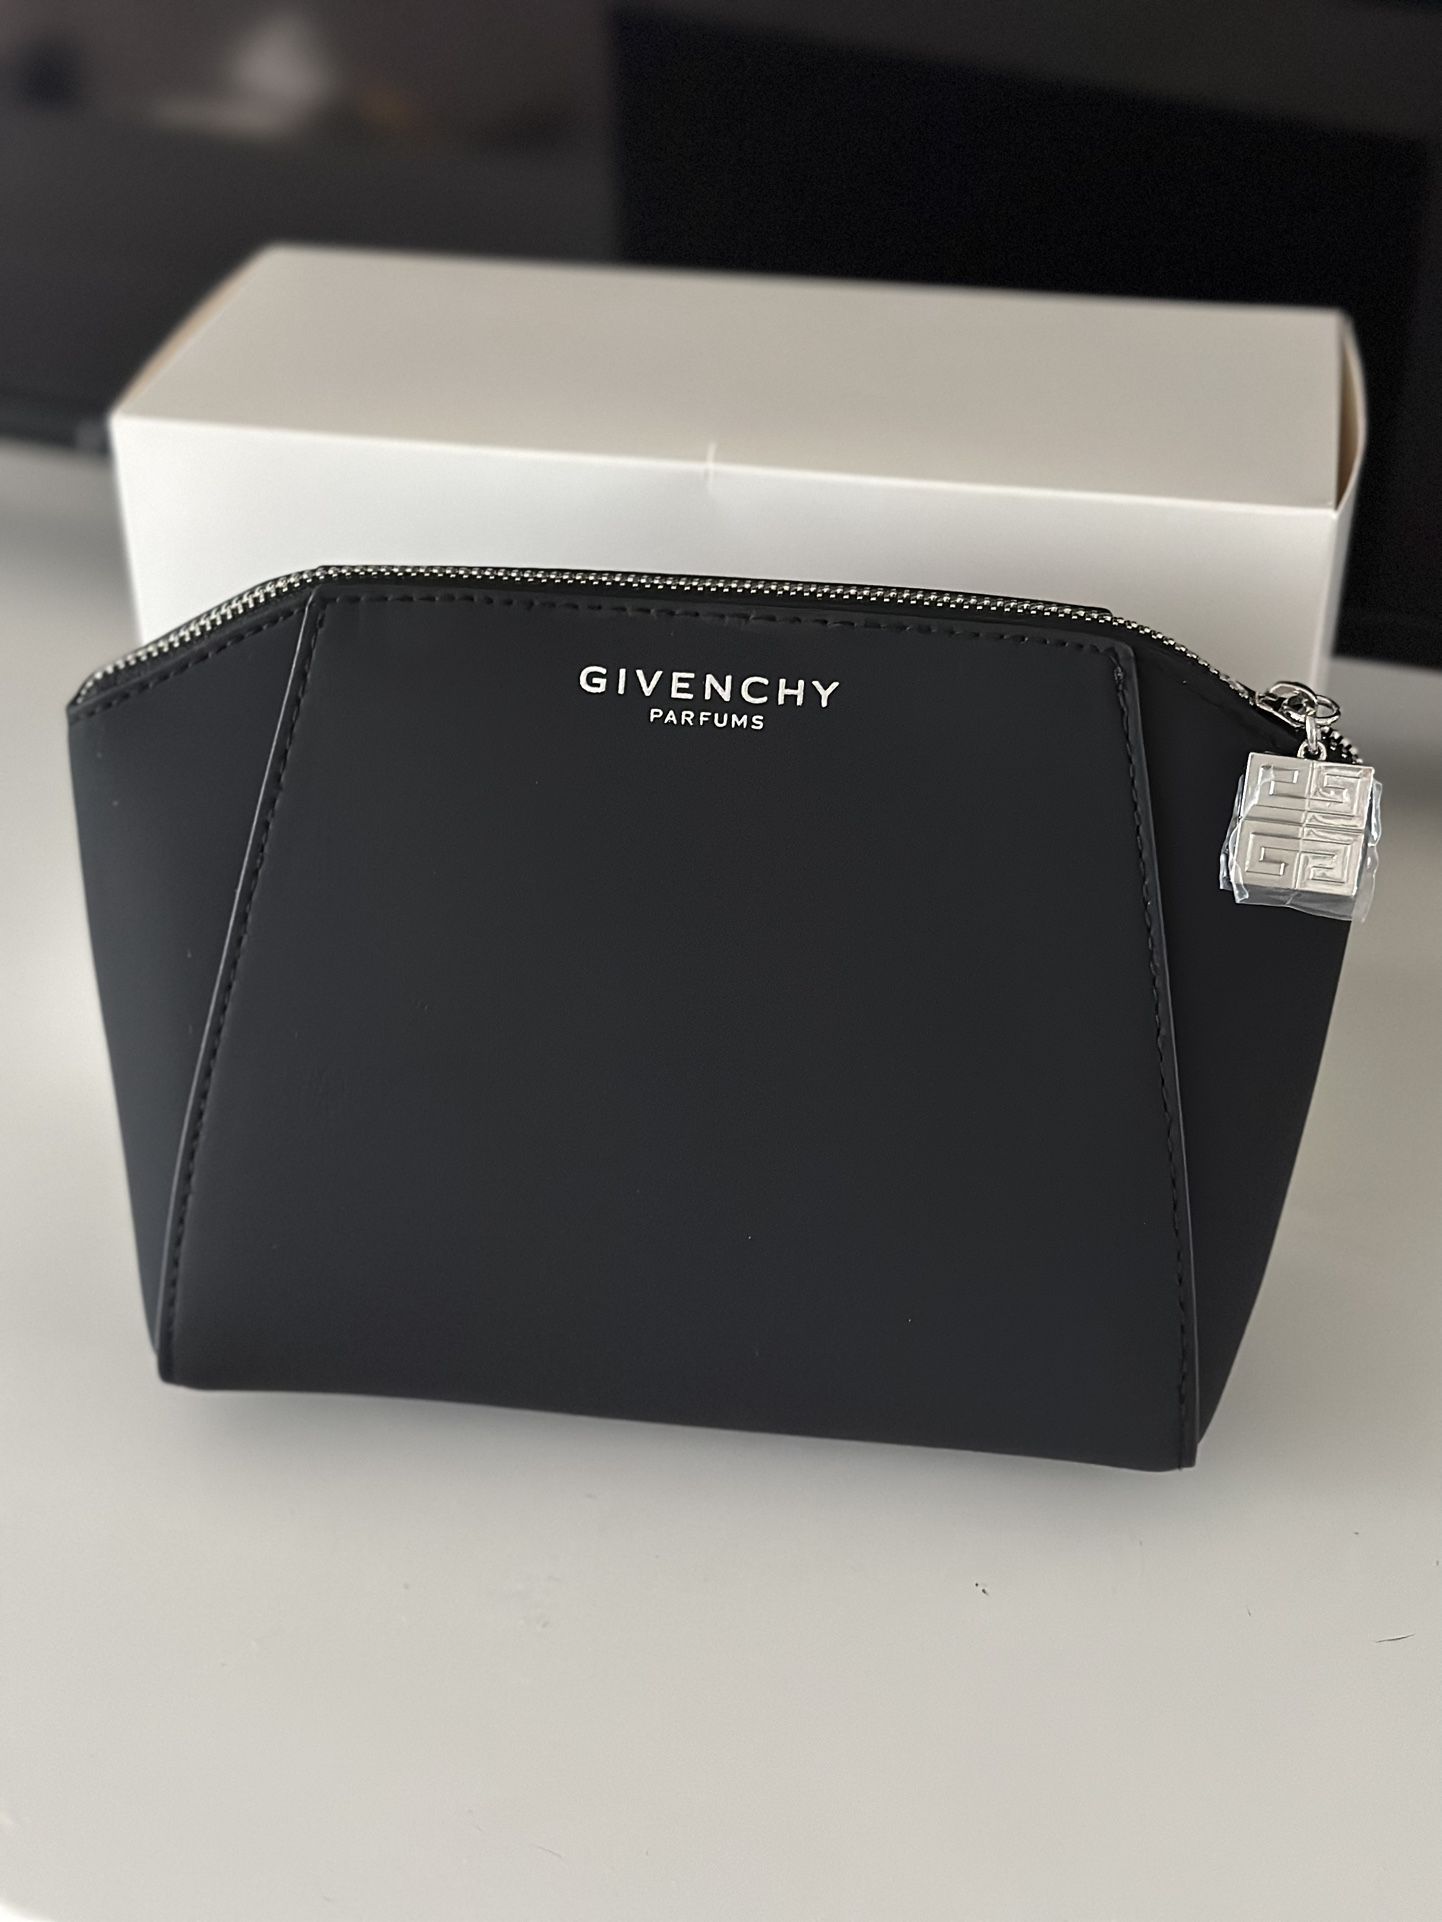 Mange Descent fødselsdag Givenchy Parfums Toiletry Logo Cosmetic Bag for Sale in Costa Mesa, CA -  OfferUp